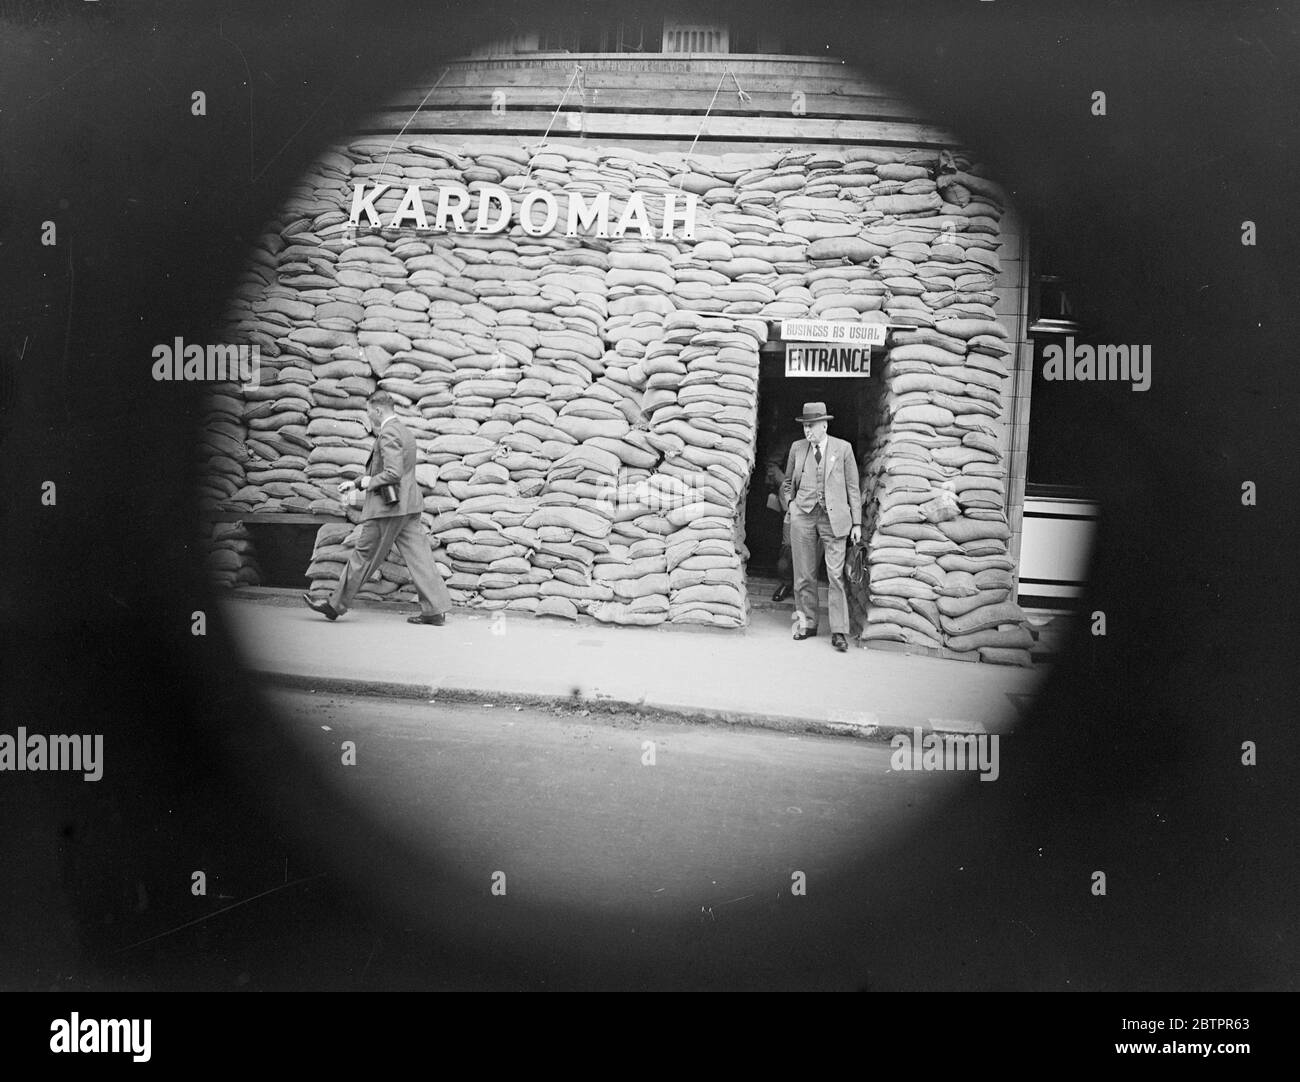 Buisness as usual. Kardomah Sand bagged front window. The photograph was taken through a spy hole as people using cameras ran the risk of being arrested. Stock Photo